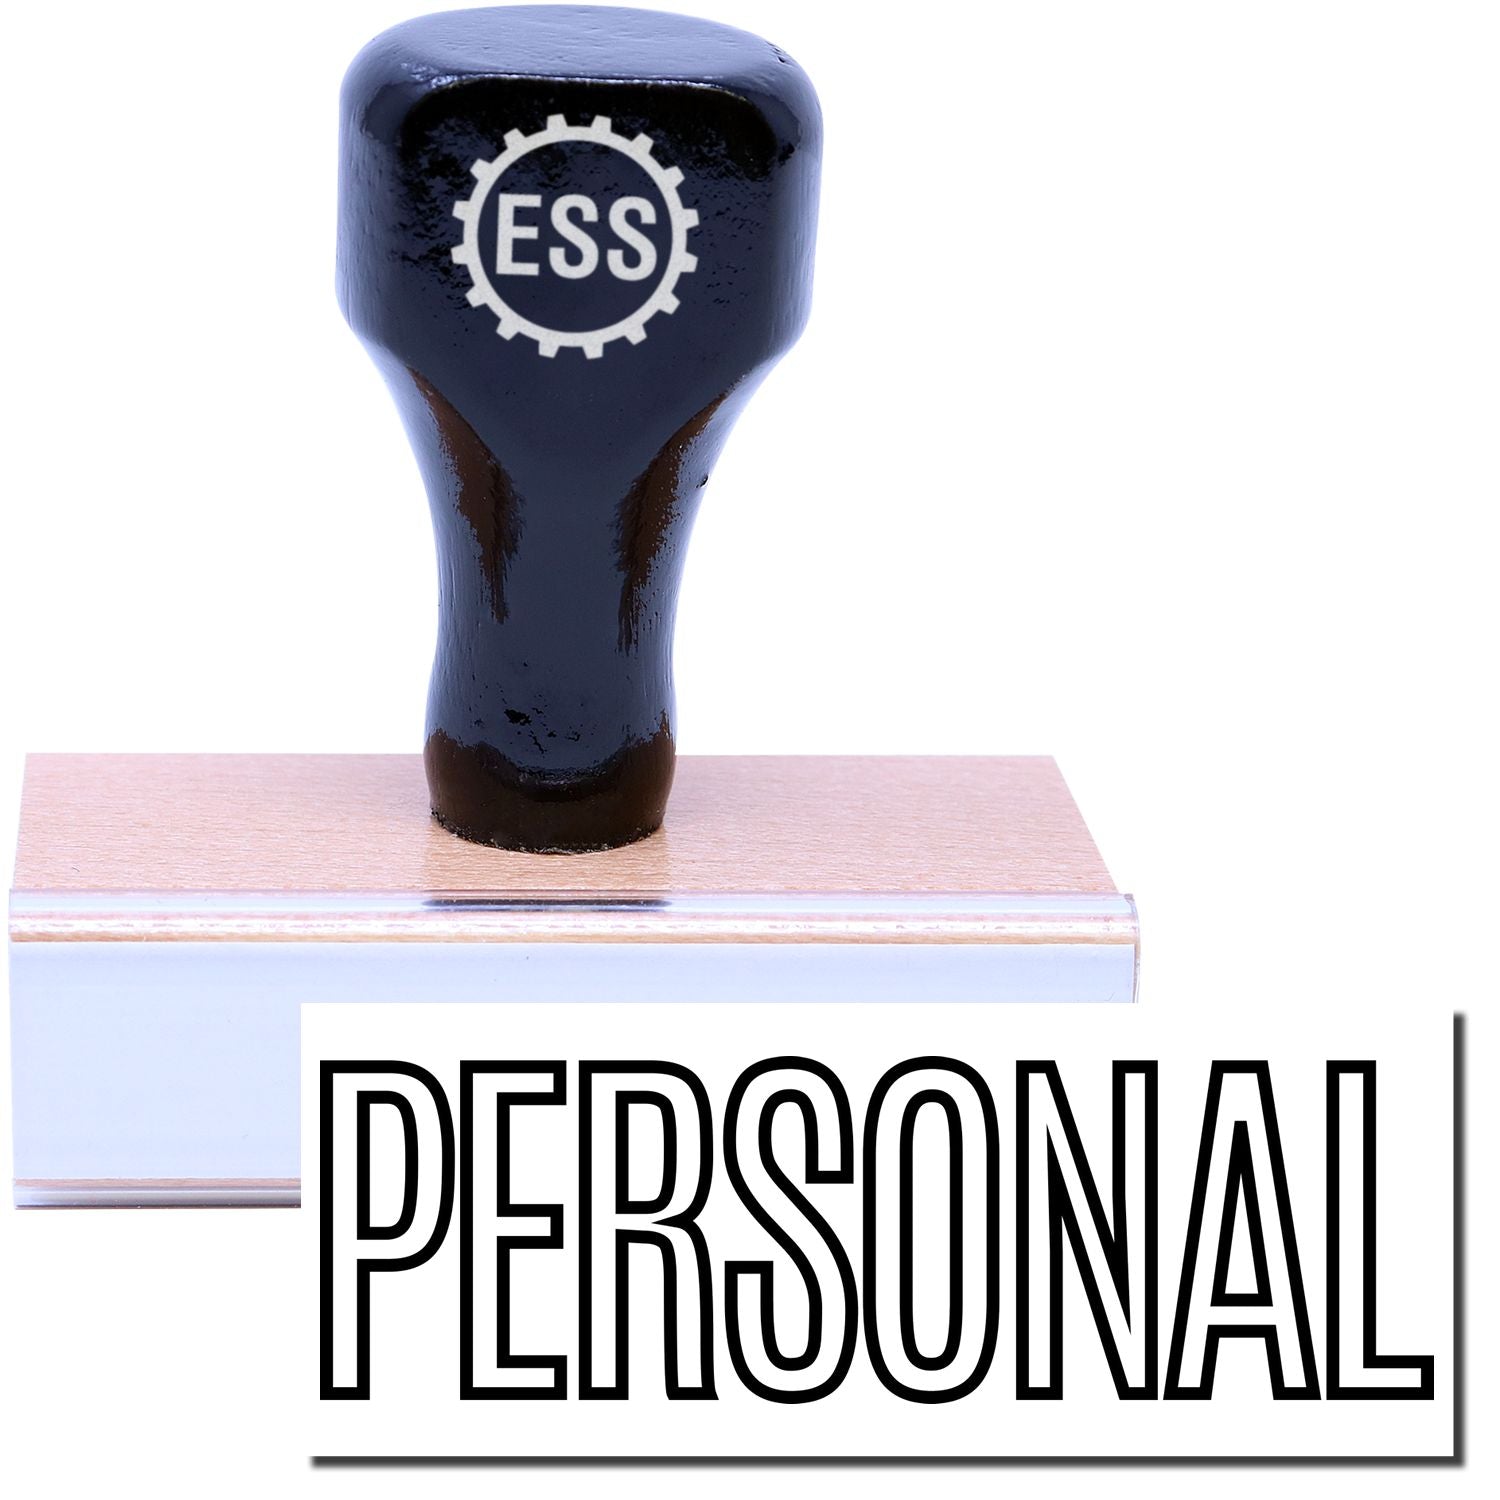 A stock office rubber stamp with a stamped image showing how the text "PERSONAL" in an outline font is displayed after stamping.